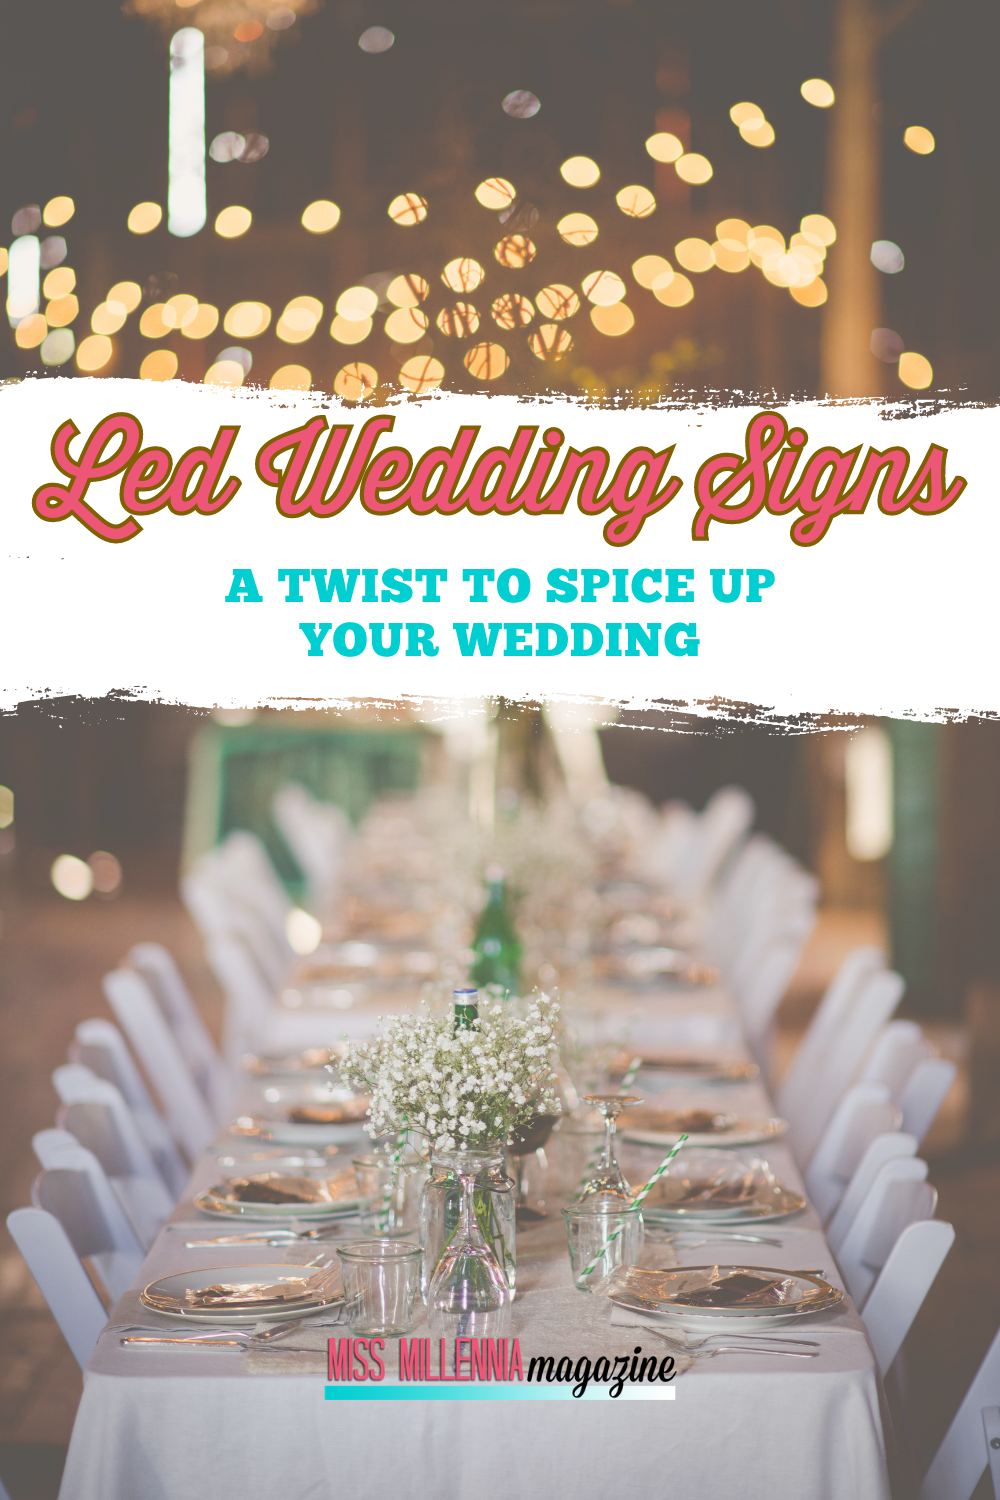 How Led Wedding Signs Could Add A Twist to Spice Up Your Wedding Venue